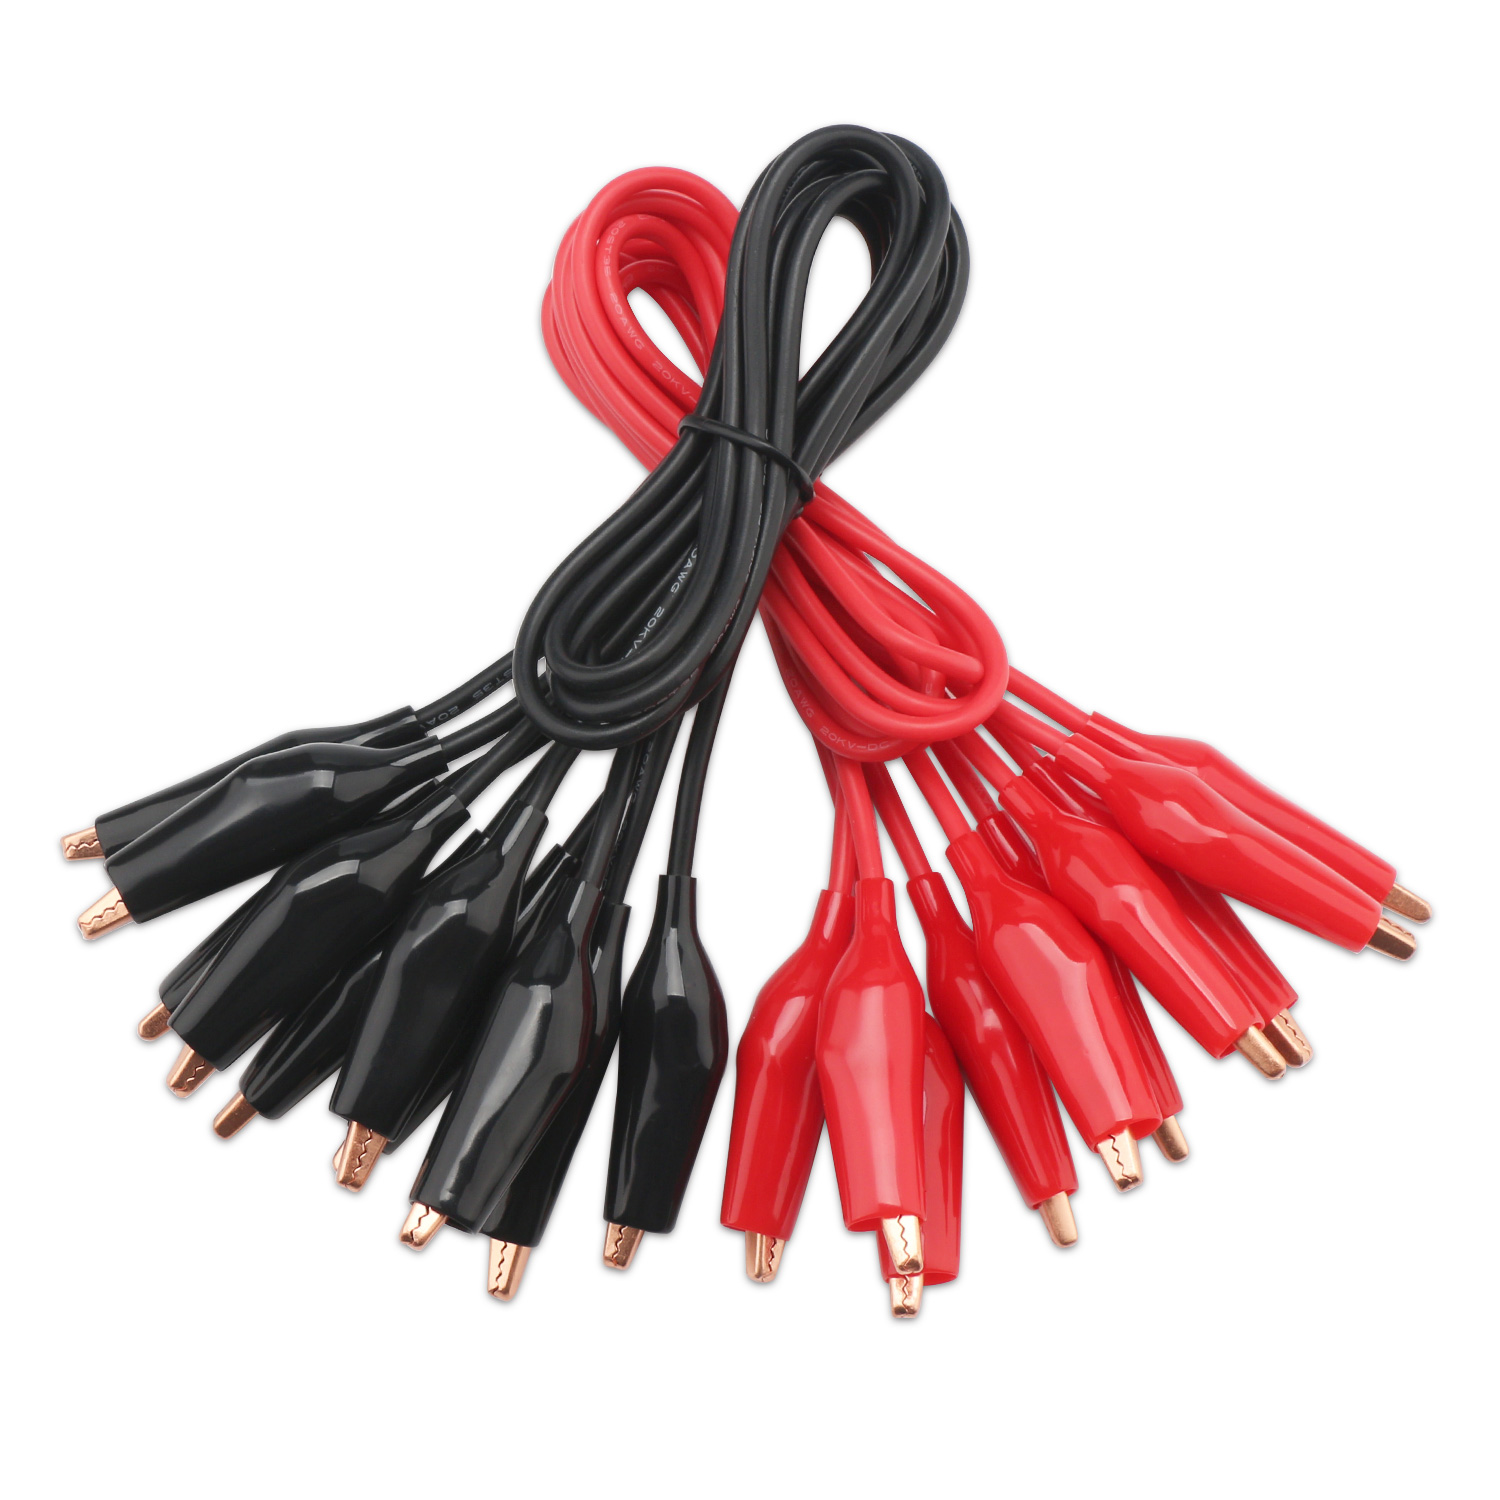 Mecion 2pcs 1 Meter Insulated Alligator Clip Test Leads Double-ended Jumper Wires 